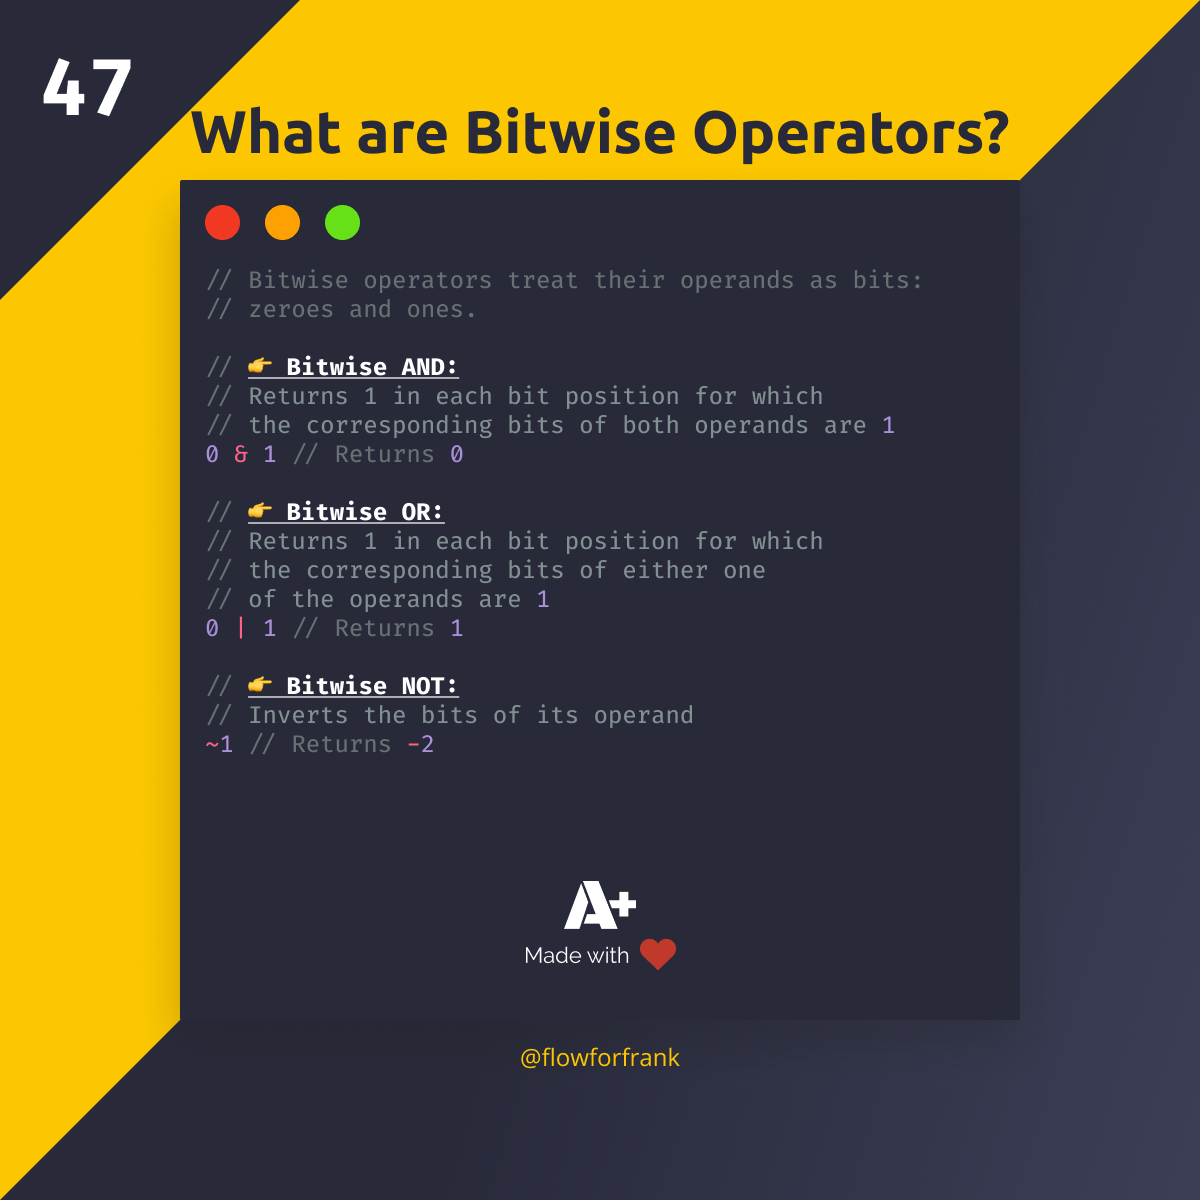 What are Bitwise Operators?